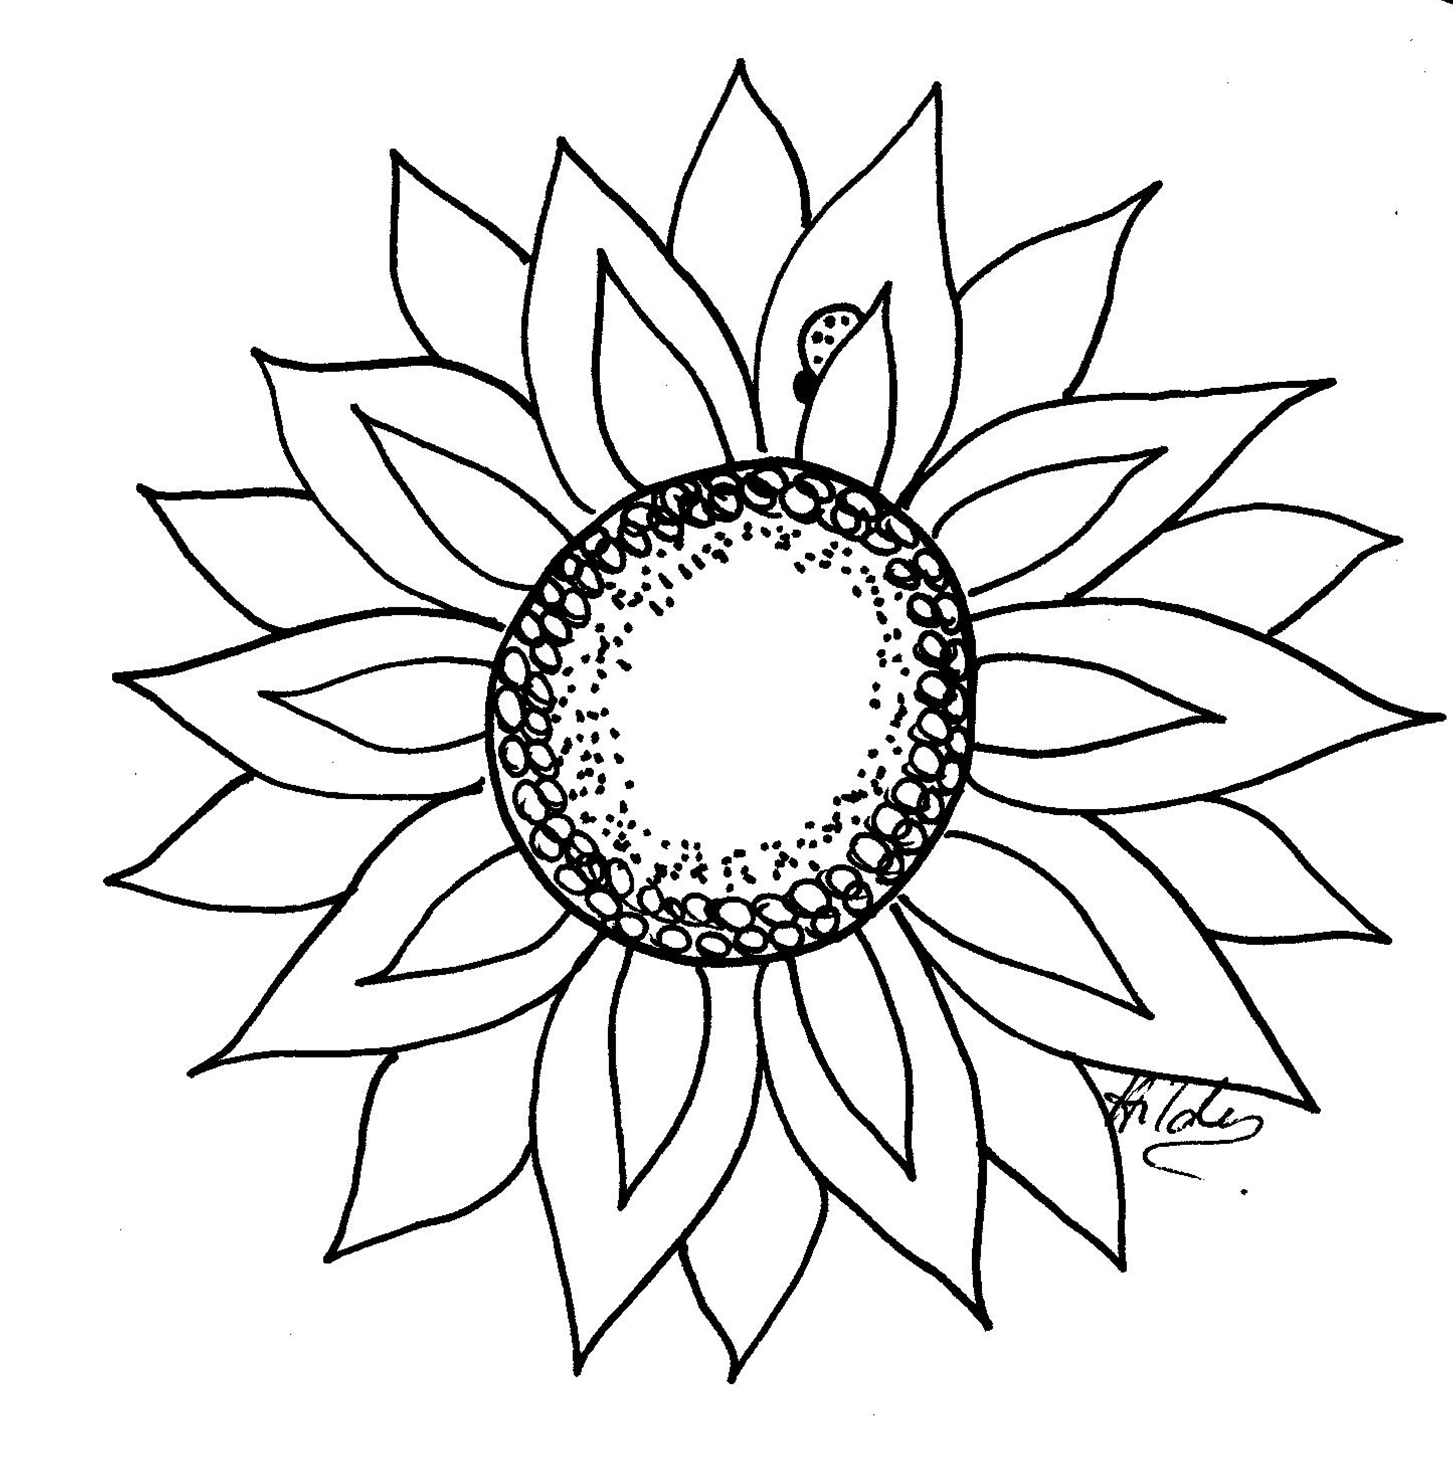 Sunflower black and white sunflower outline clipart WikiClipArt